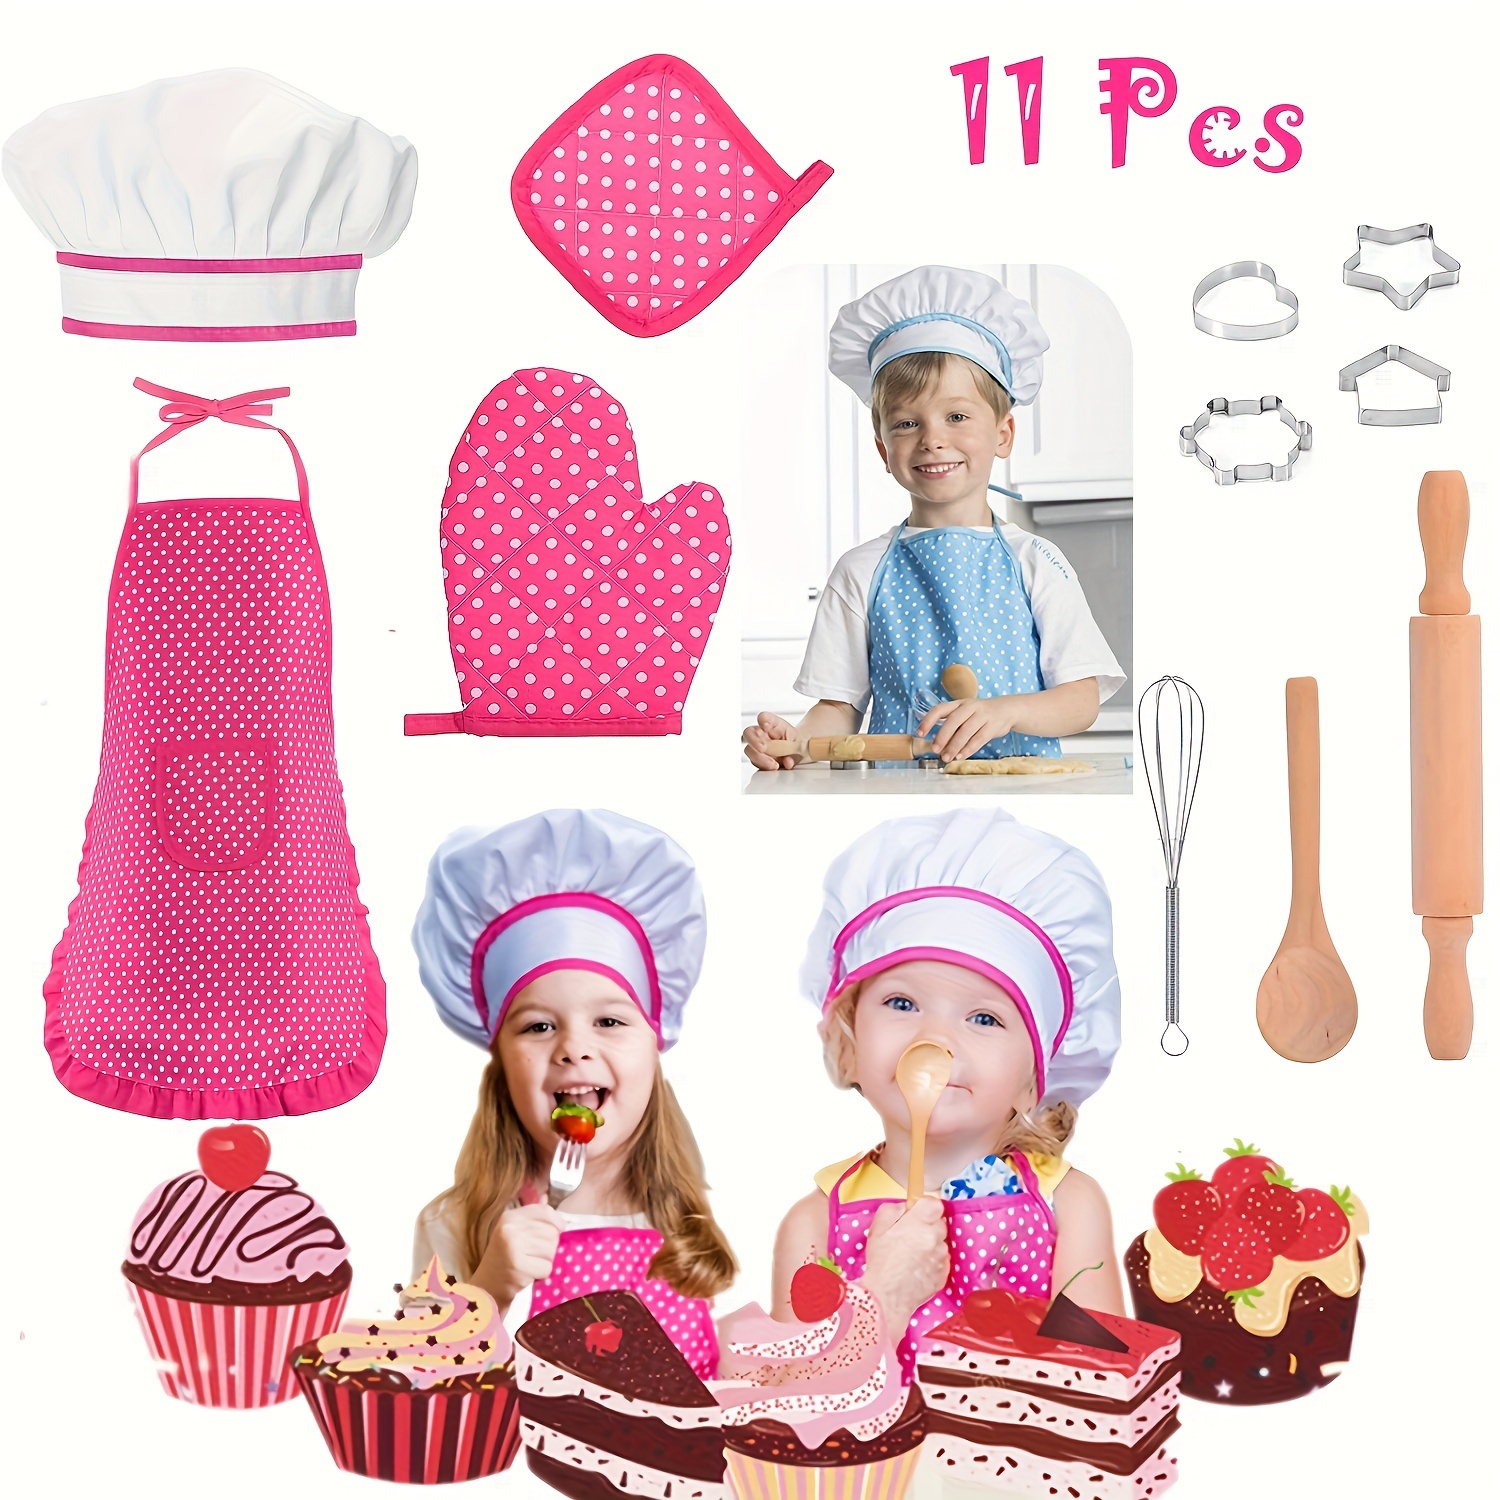 Play Food Sets for Kids Kitchen, Play Kitchen Accessories 46Pcs, Stainless  Steel Cookware Pots and Pans Set with CuteApron, Cutting Play Food, Cooking